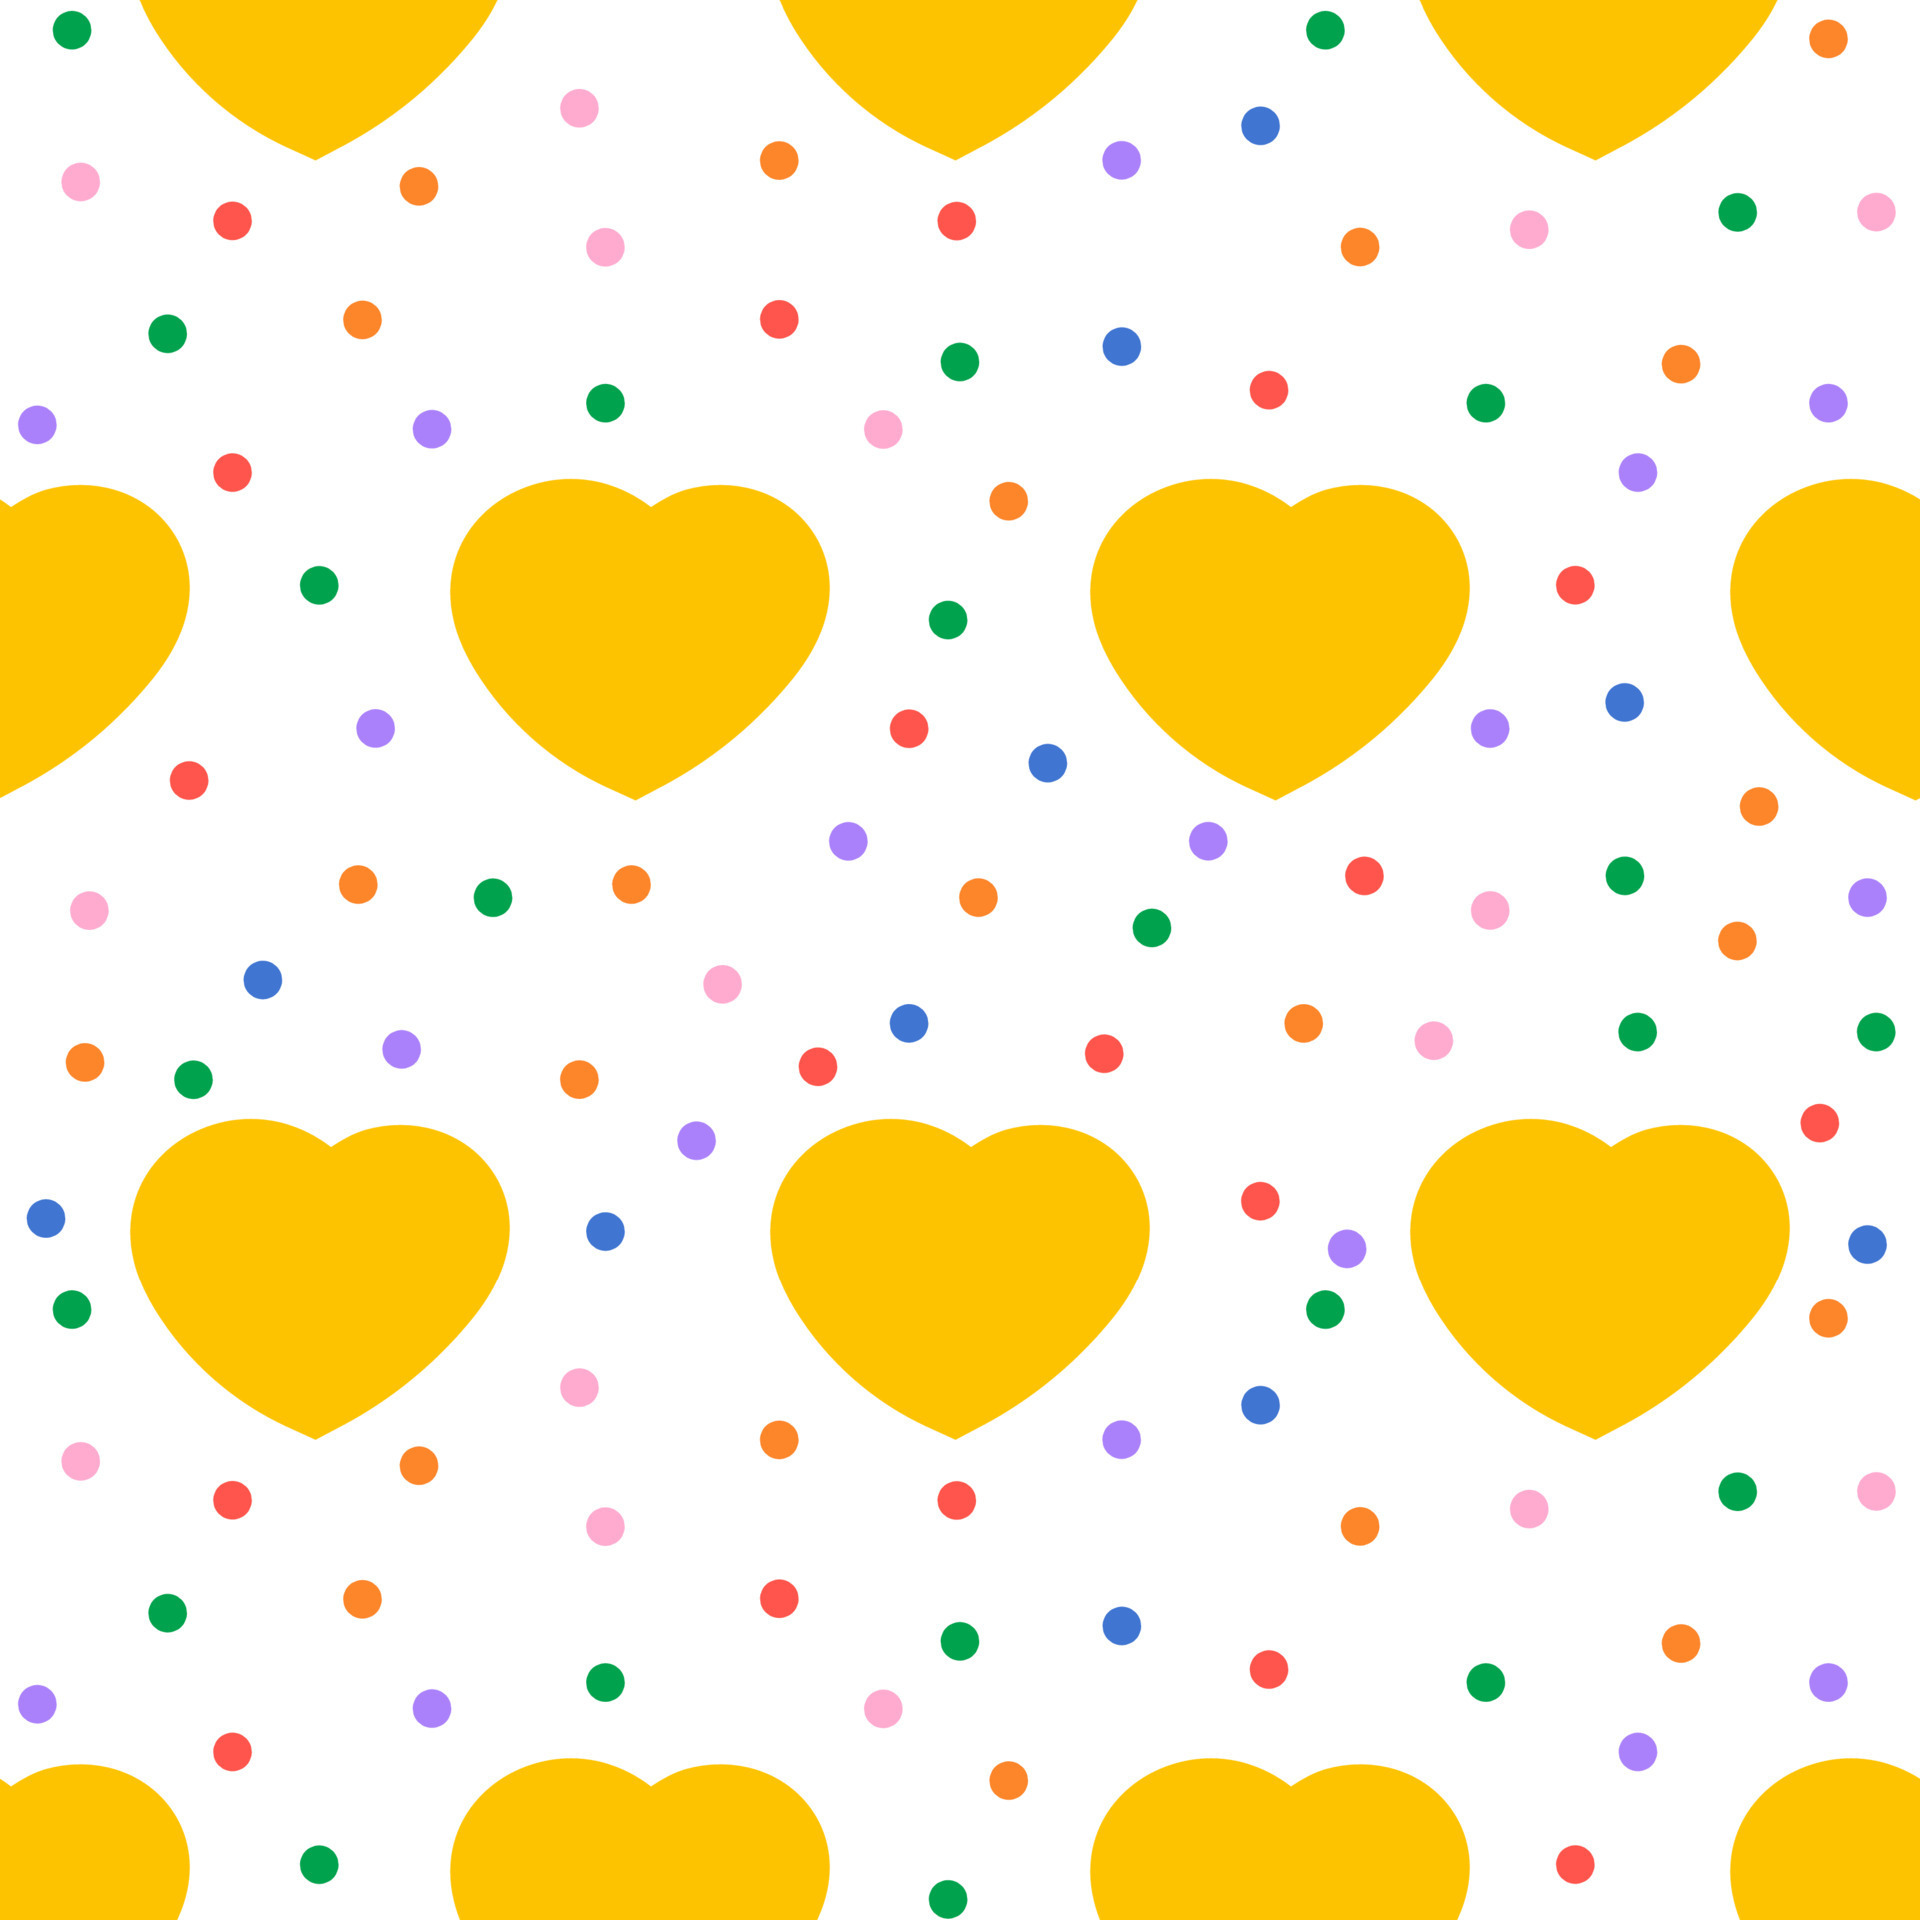 Cute seamless pattern with hand drawn yellow hearts, bright colorful points. Hearts and polka dot. Valentine's day background. Festive pattern for fabric, textile, wallpaper, gift, wrapping paper